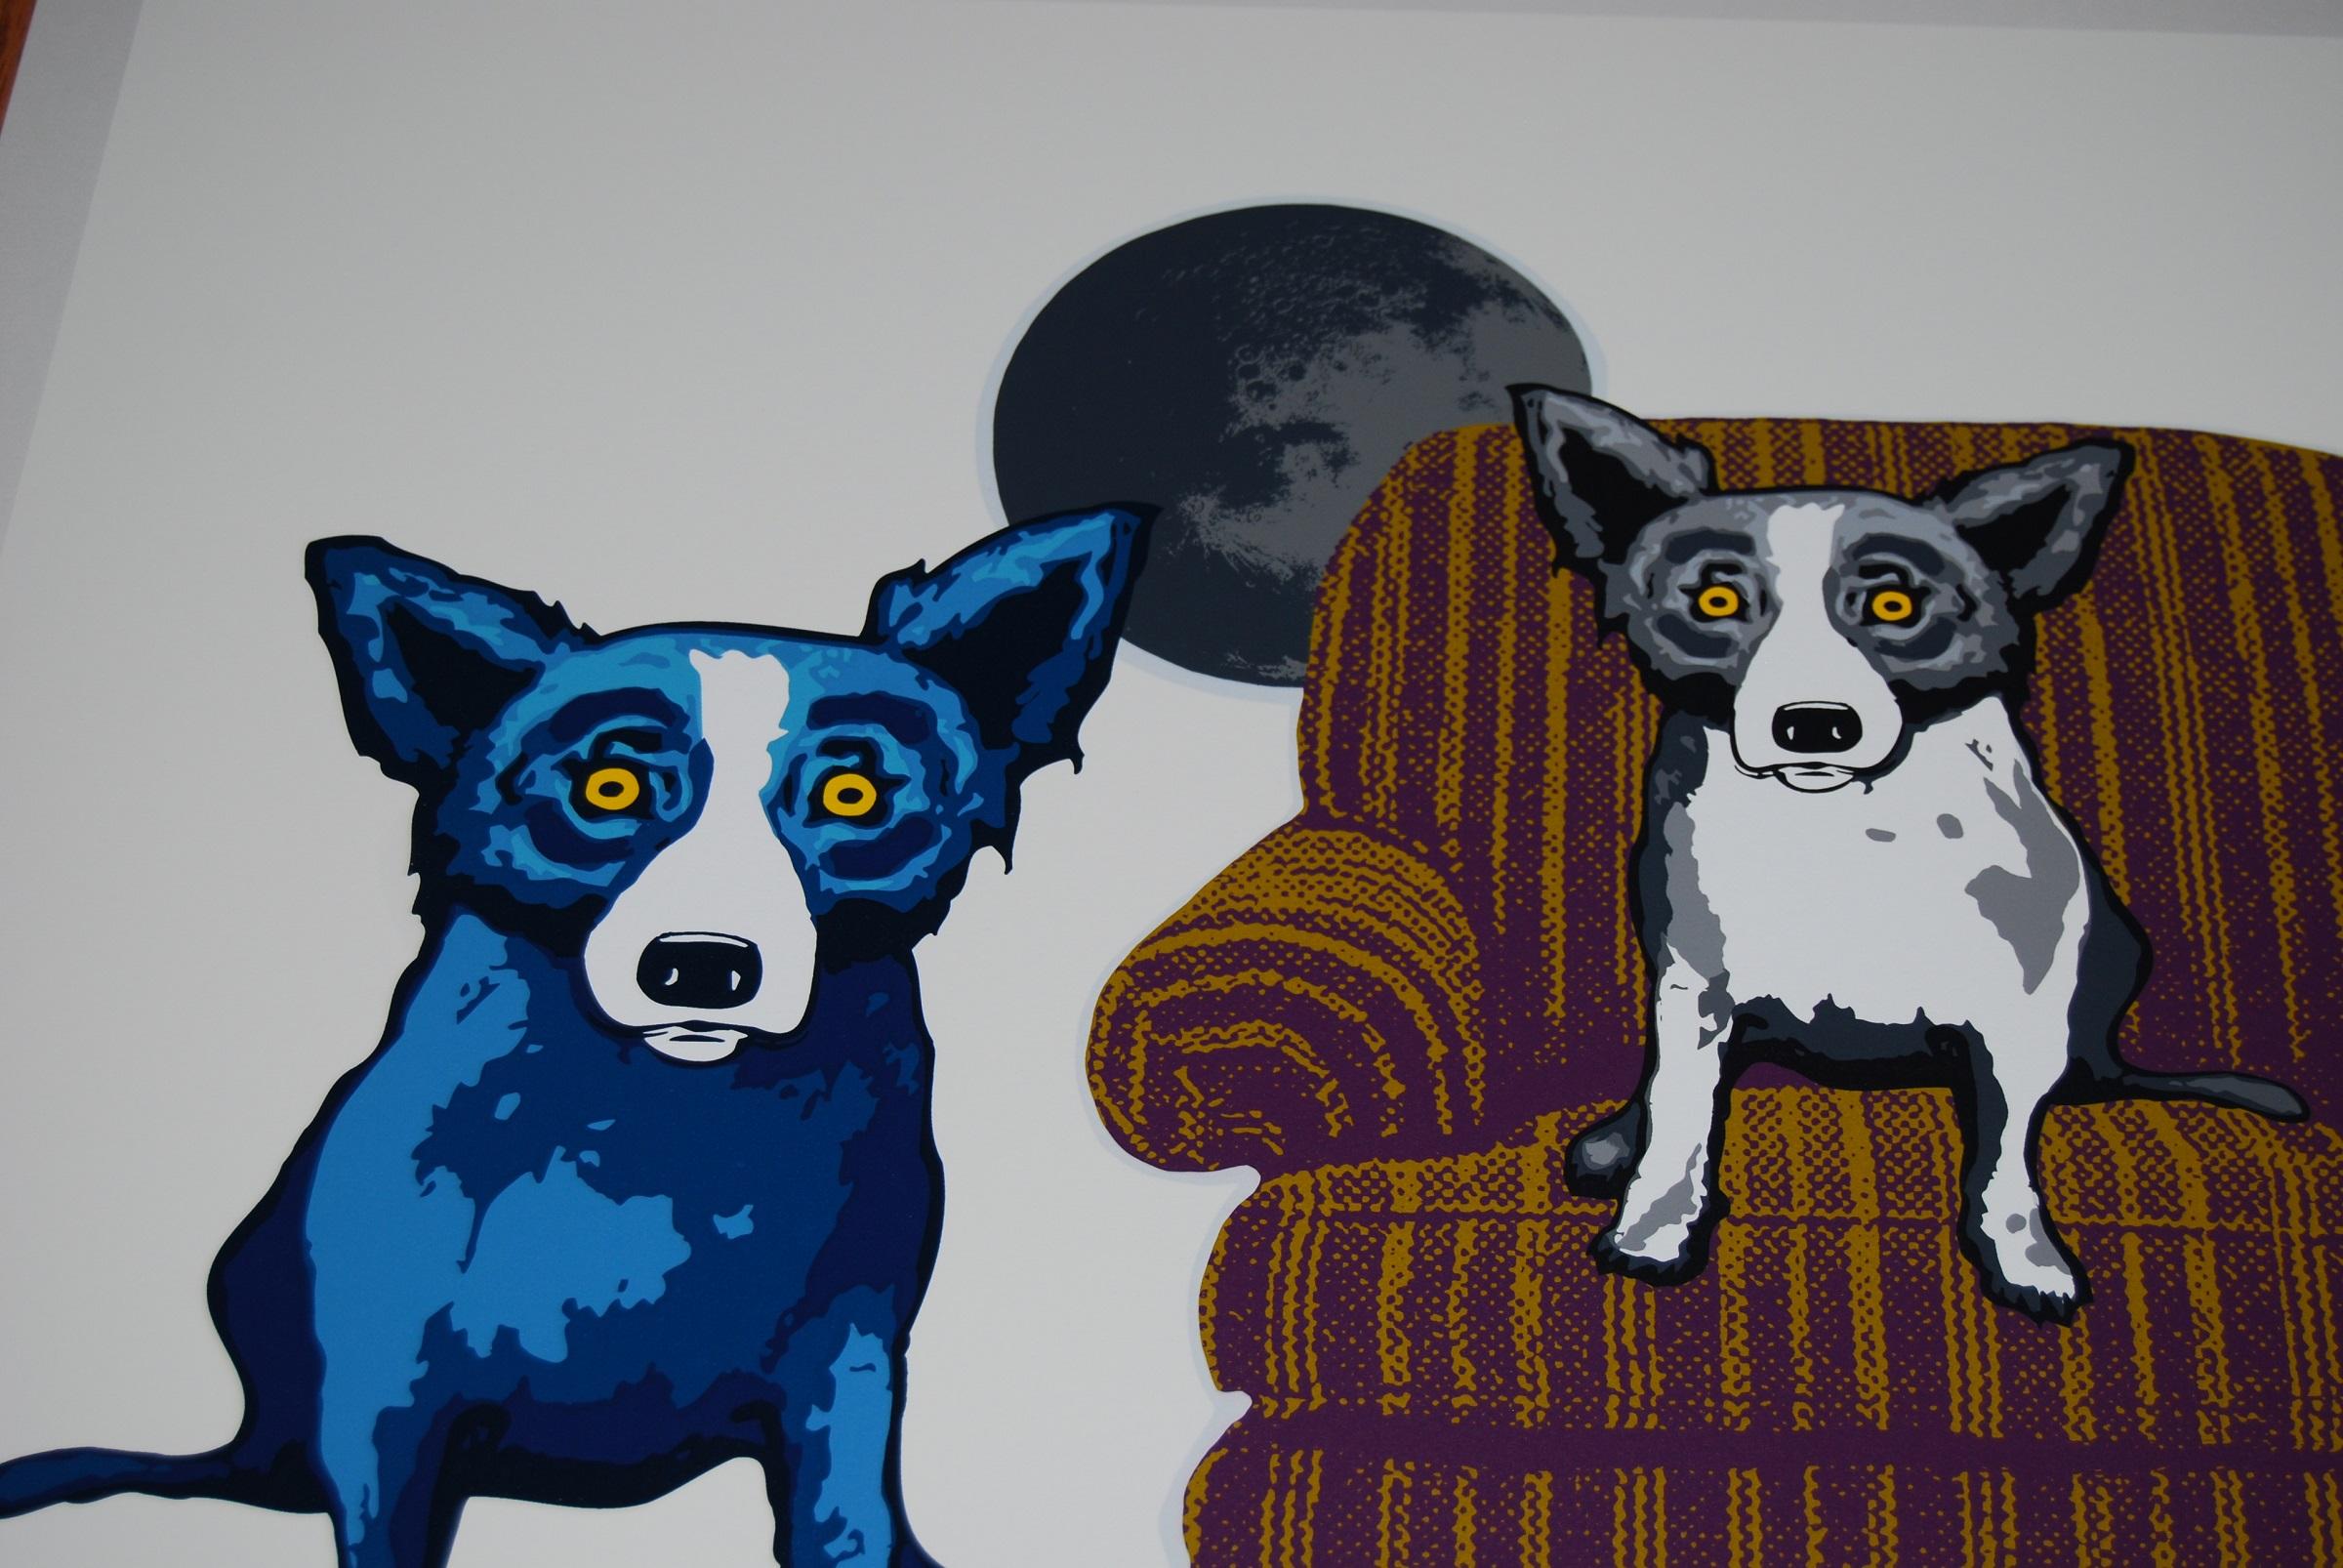 This Blue Dog work consists of a white background, 3 dogs, 1 each black & white, Red and blue.  The black & white dog is sitting on a 2-toned brown overstuffed chair while the blue & red dogs are sitting on either side of the chair.  There is a